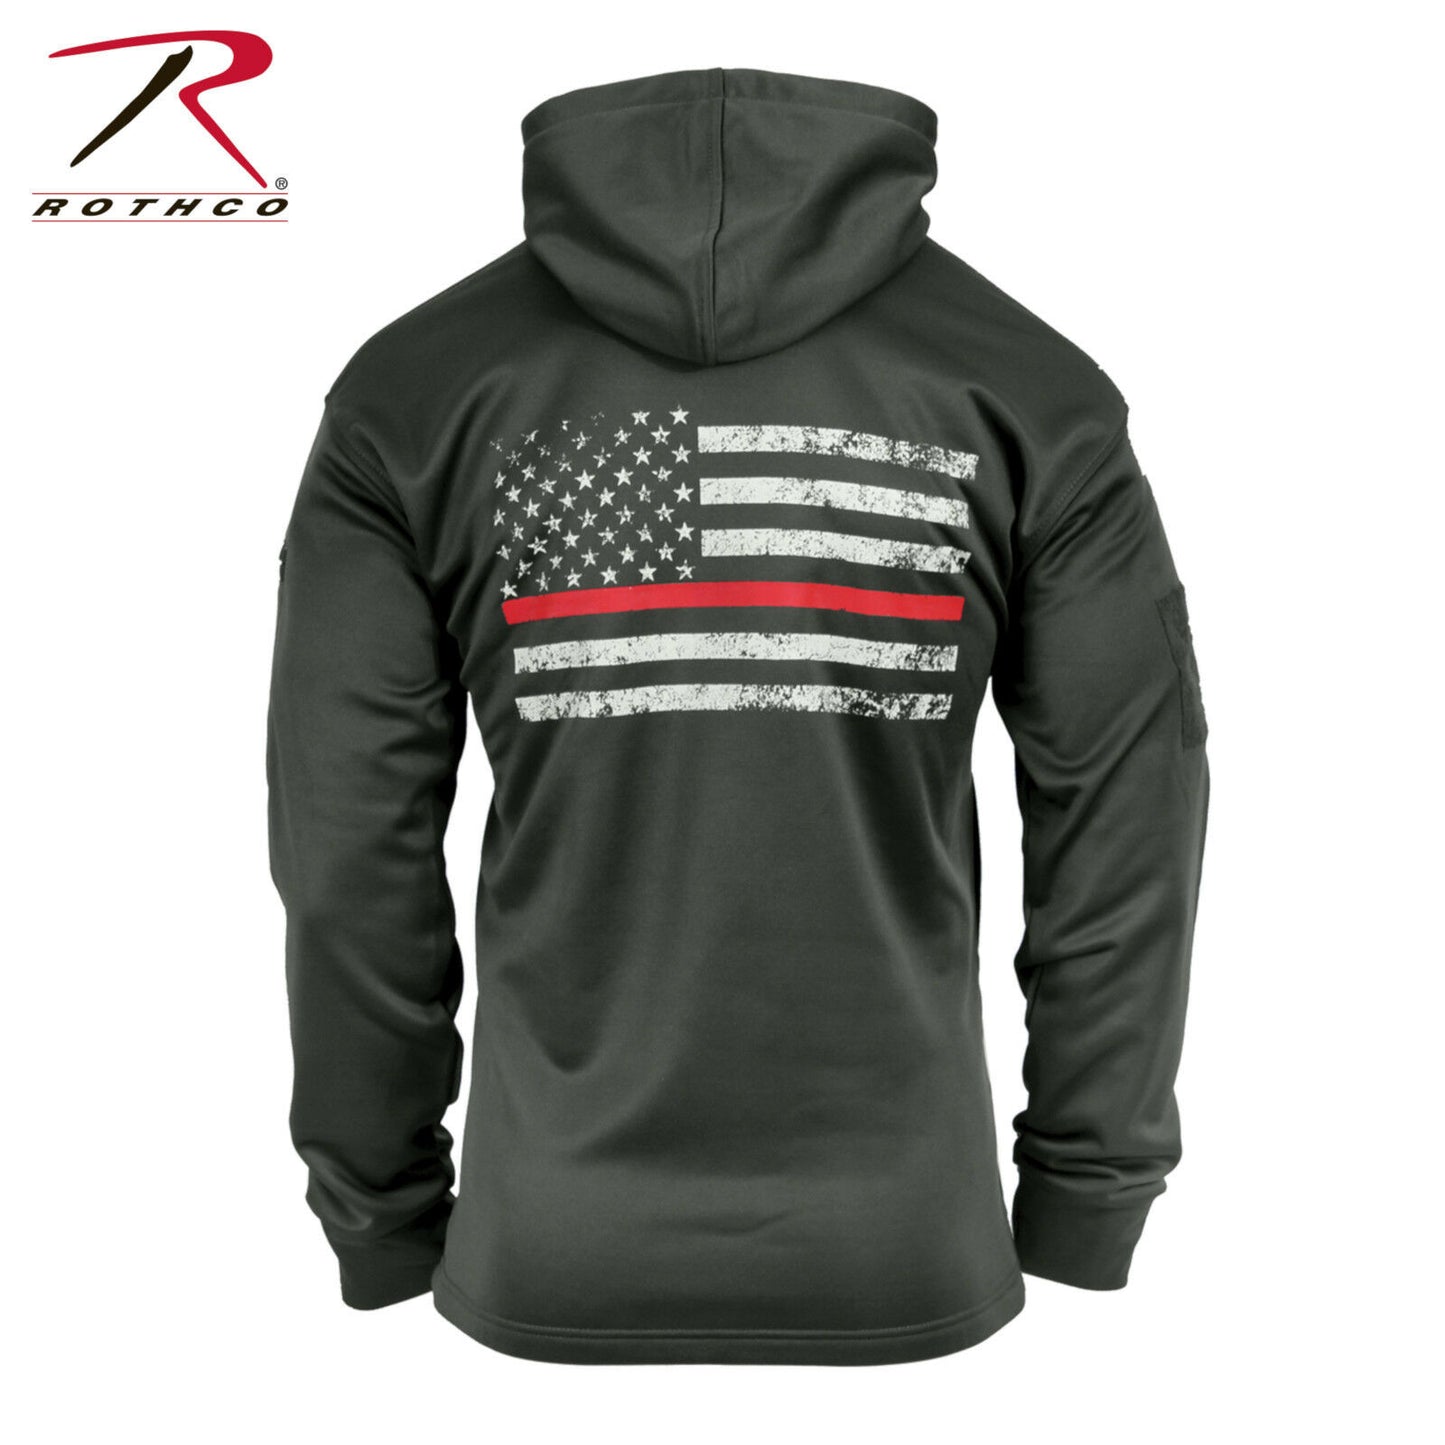 Men's Thin Red Line Concealed Carry Grey Hoodie - TRL Hooded Sweatshirt w/ Patch